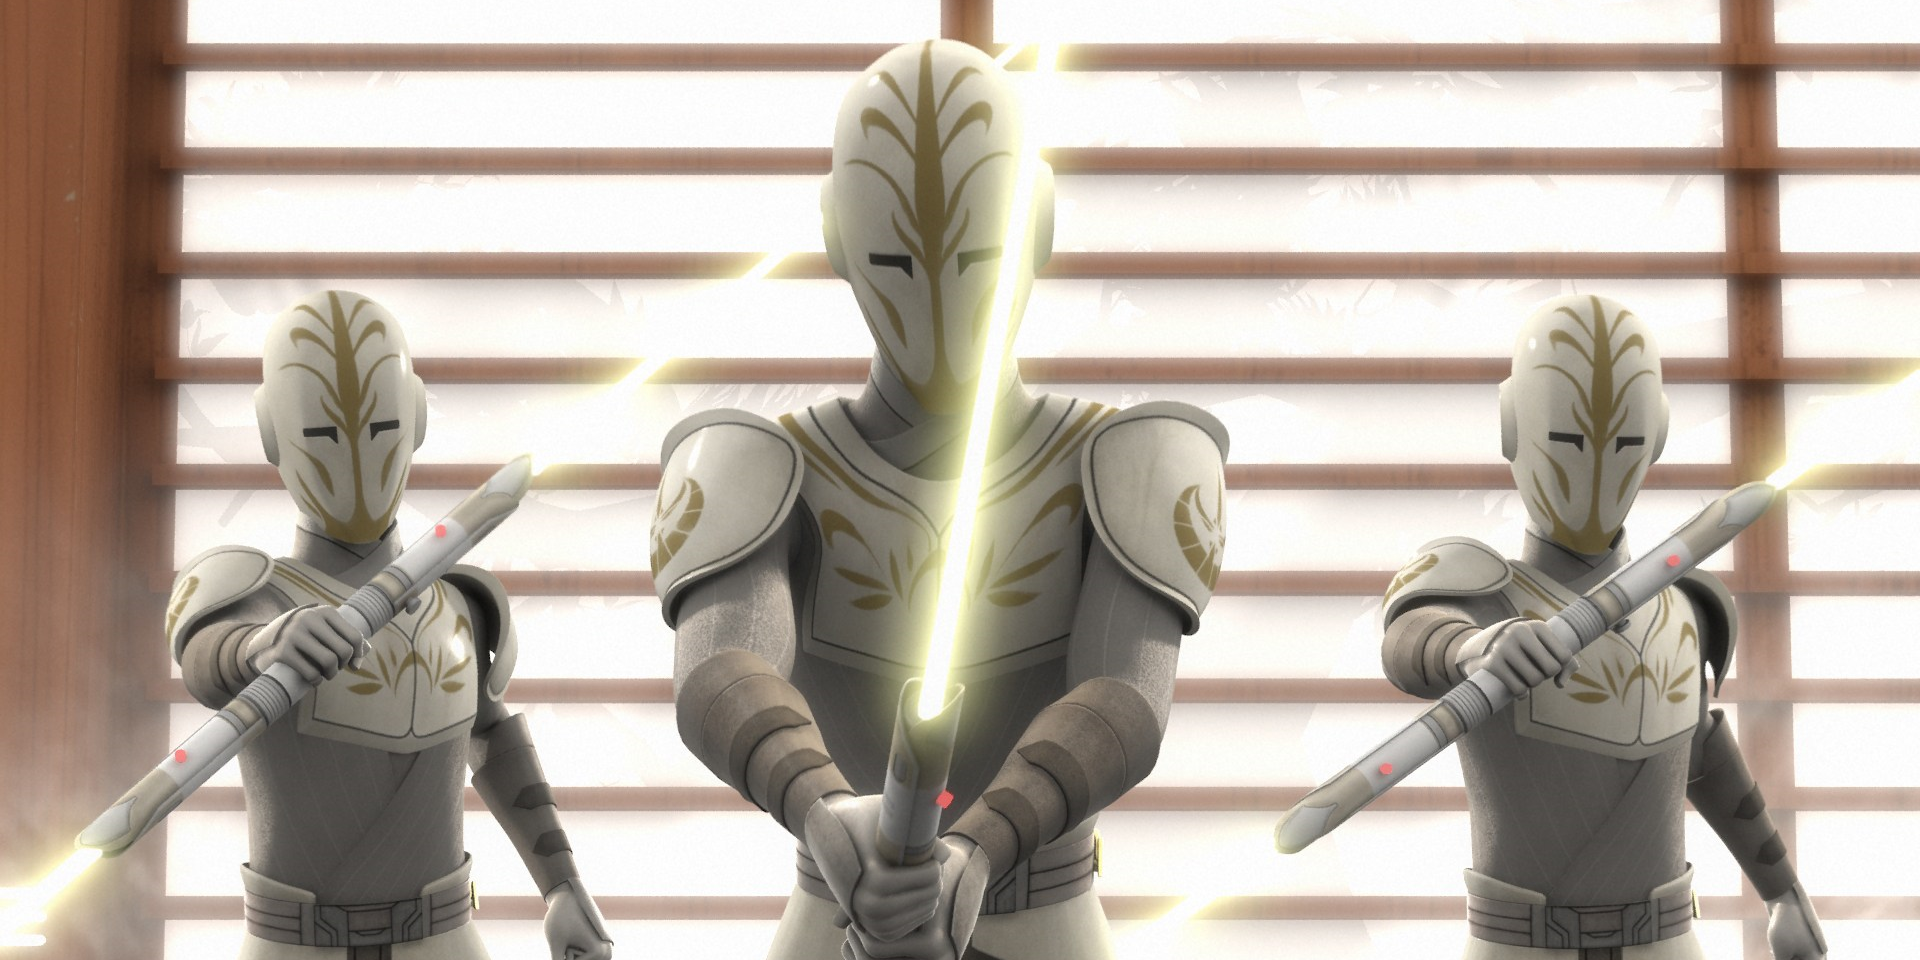 Three Jedi Temple guards wielding pale yellow lightsabers